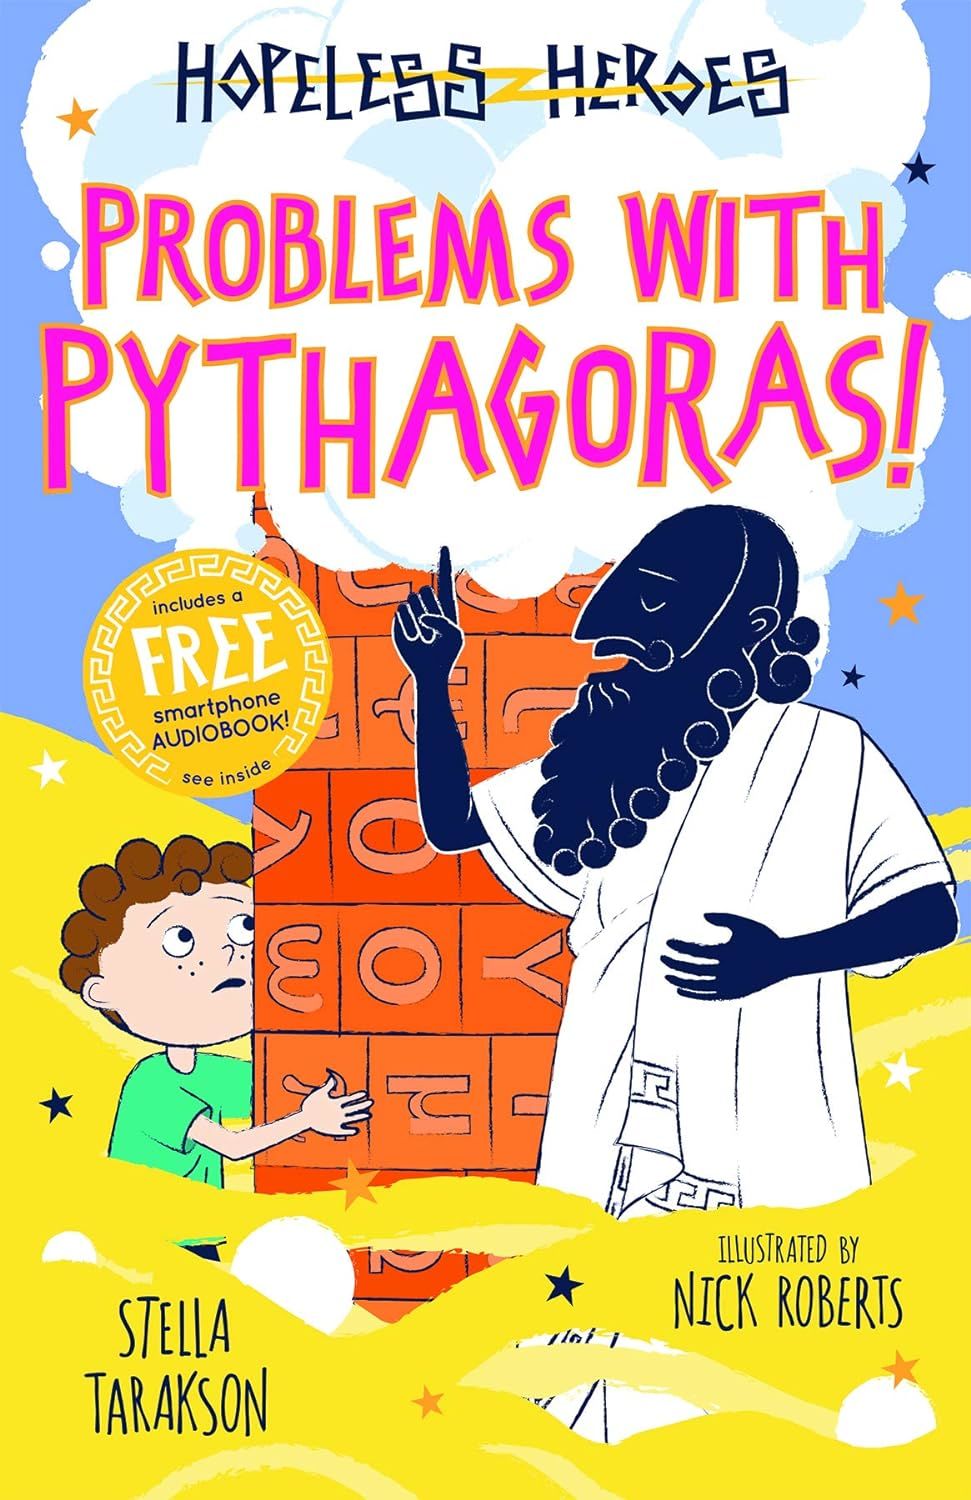 Problems with Pythagoras! , Hopeless Heroes 4